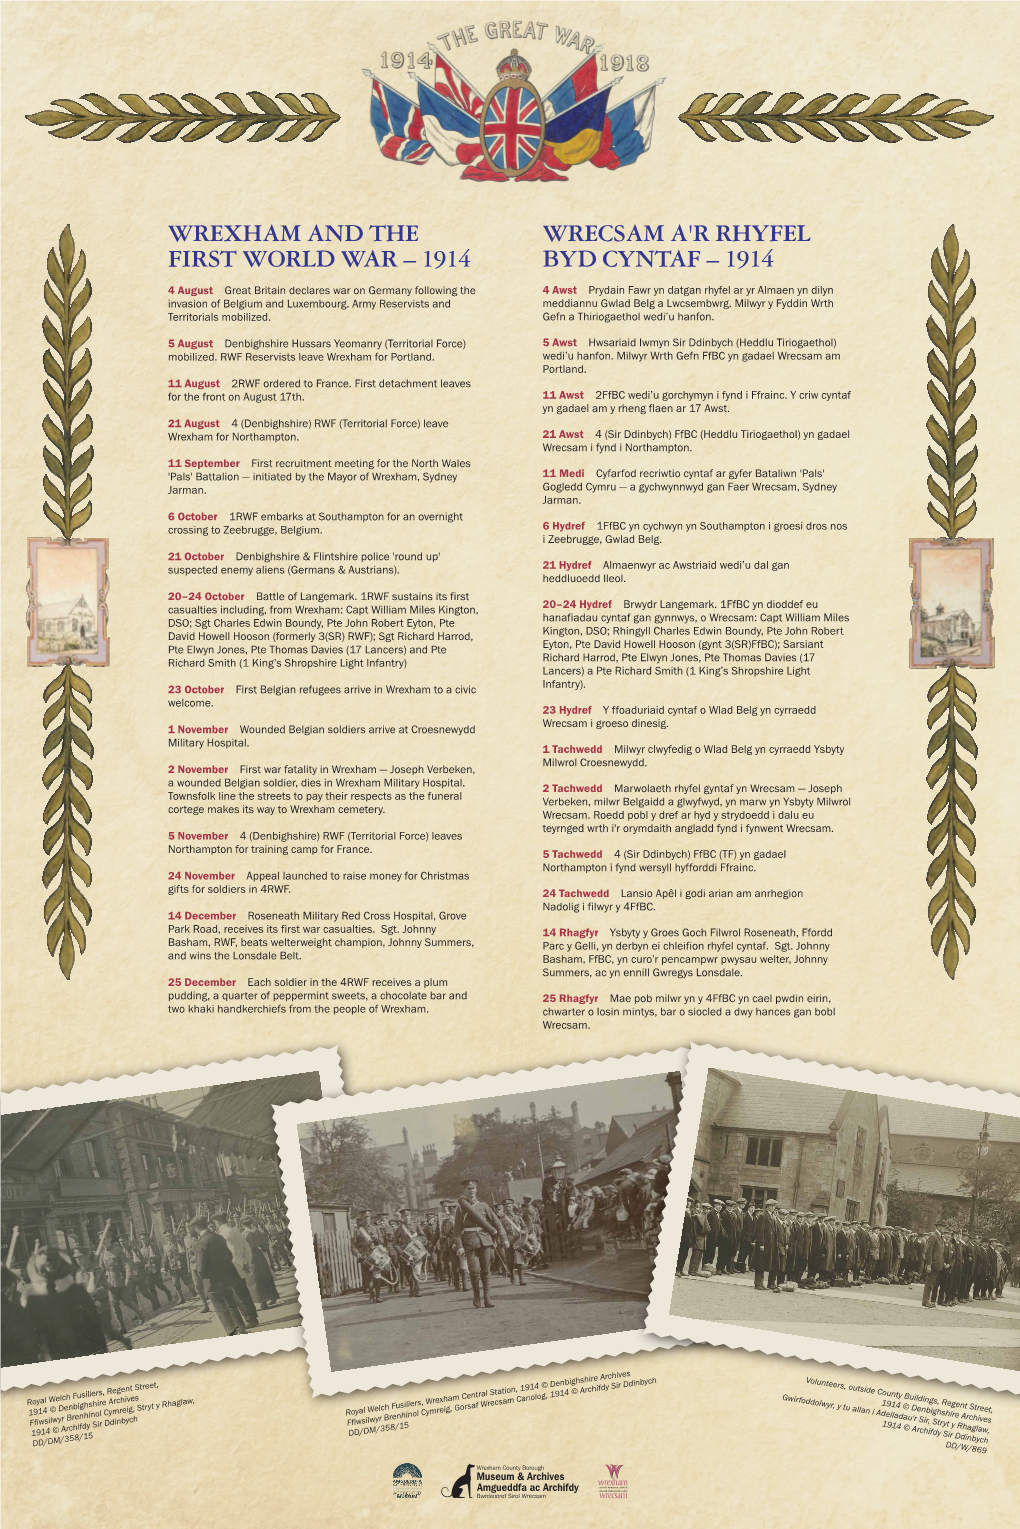 Wrexham and the First World War 1914 – Panel 2